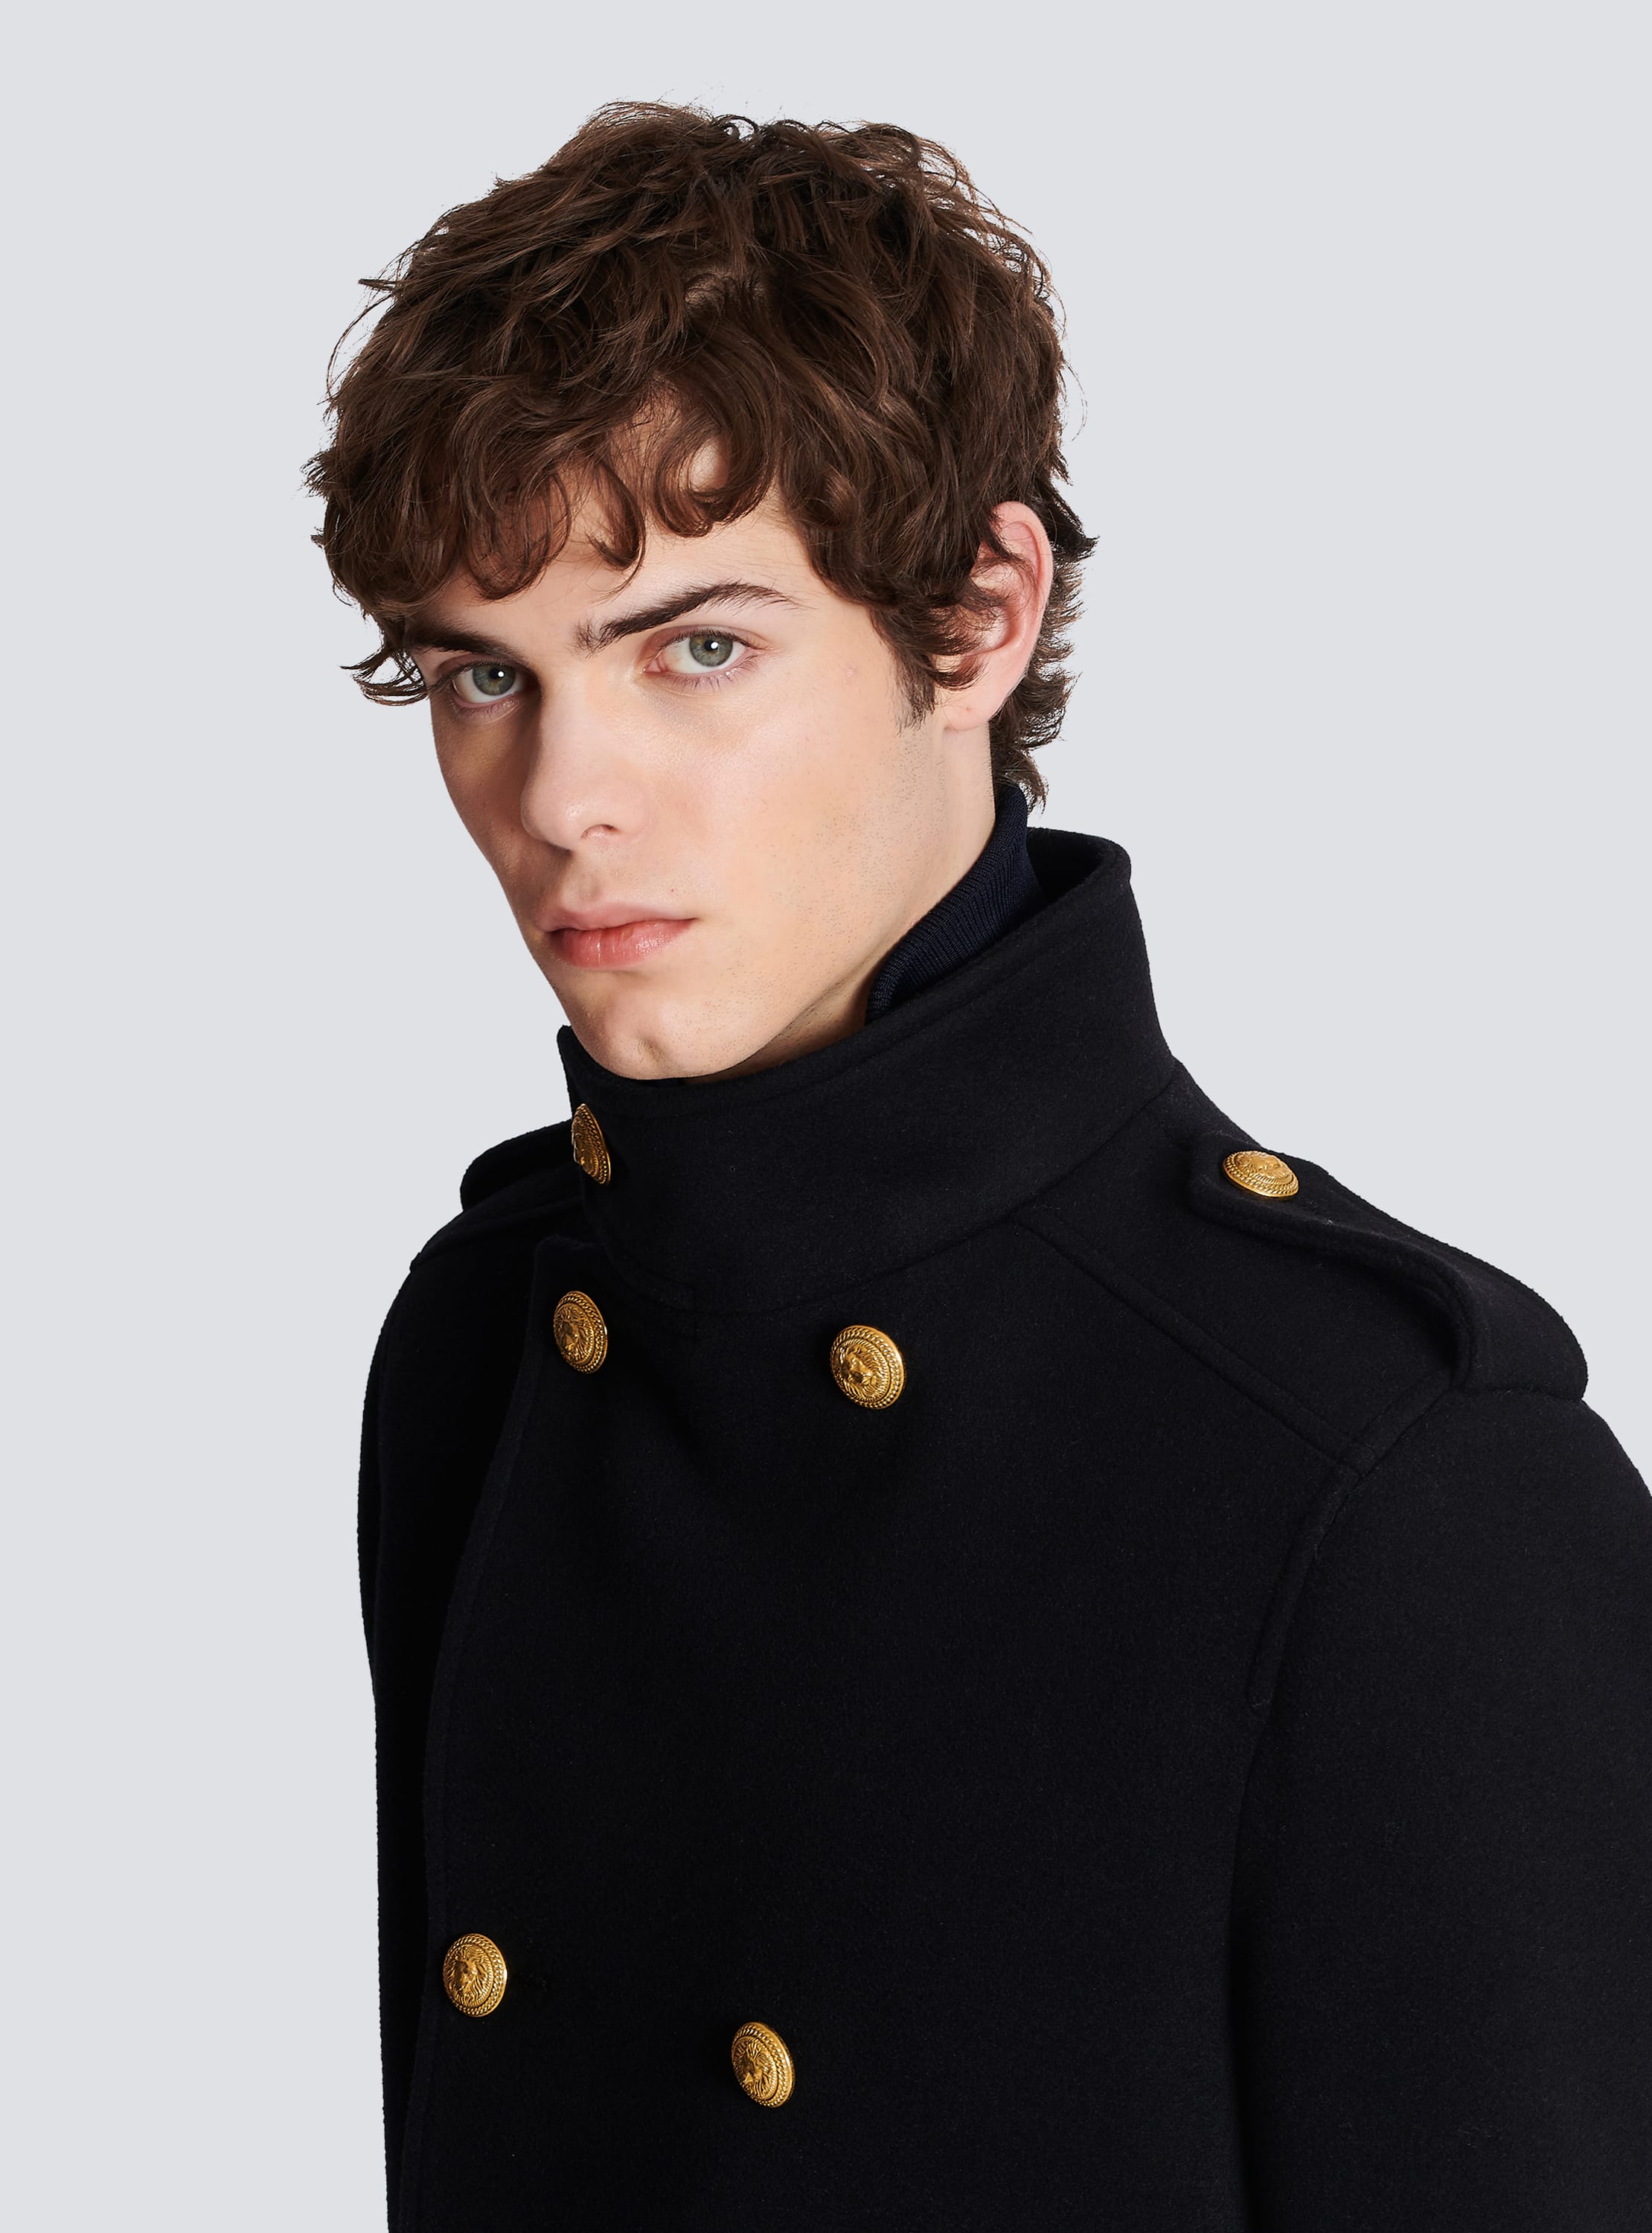 Balmain Double-breasted Wool-blend Military Coat in Black for Men